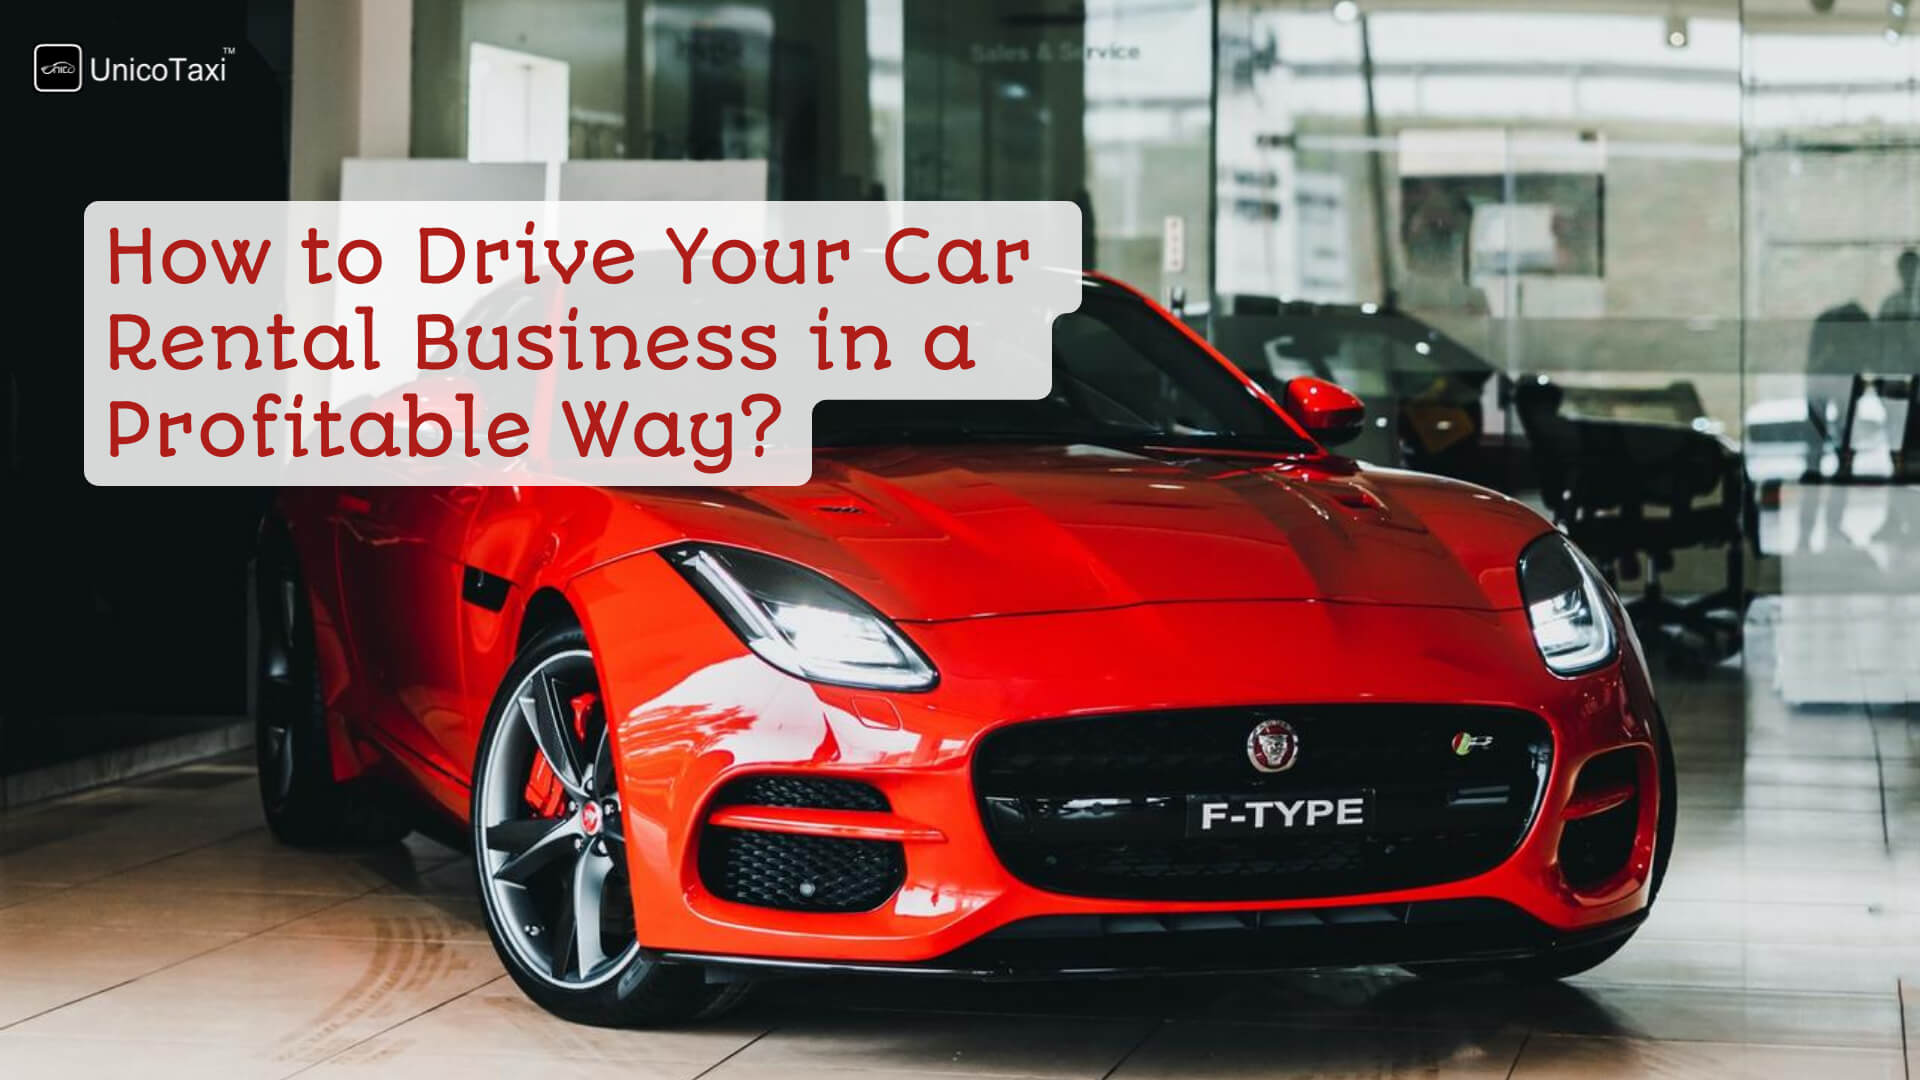 How to Drive Your Car Rental Business in a Profitable Way Through Automation?